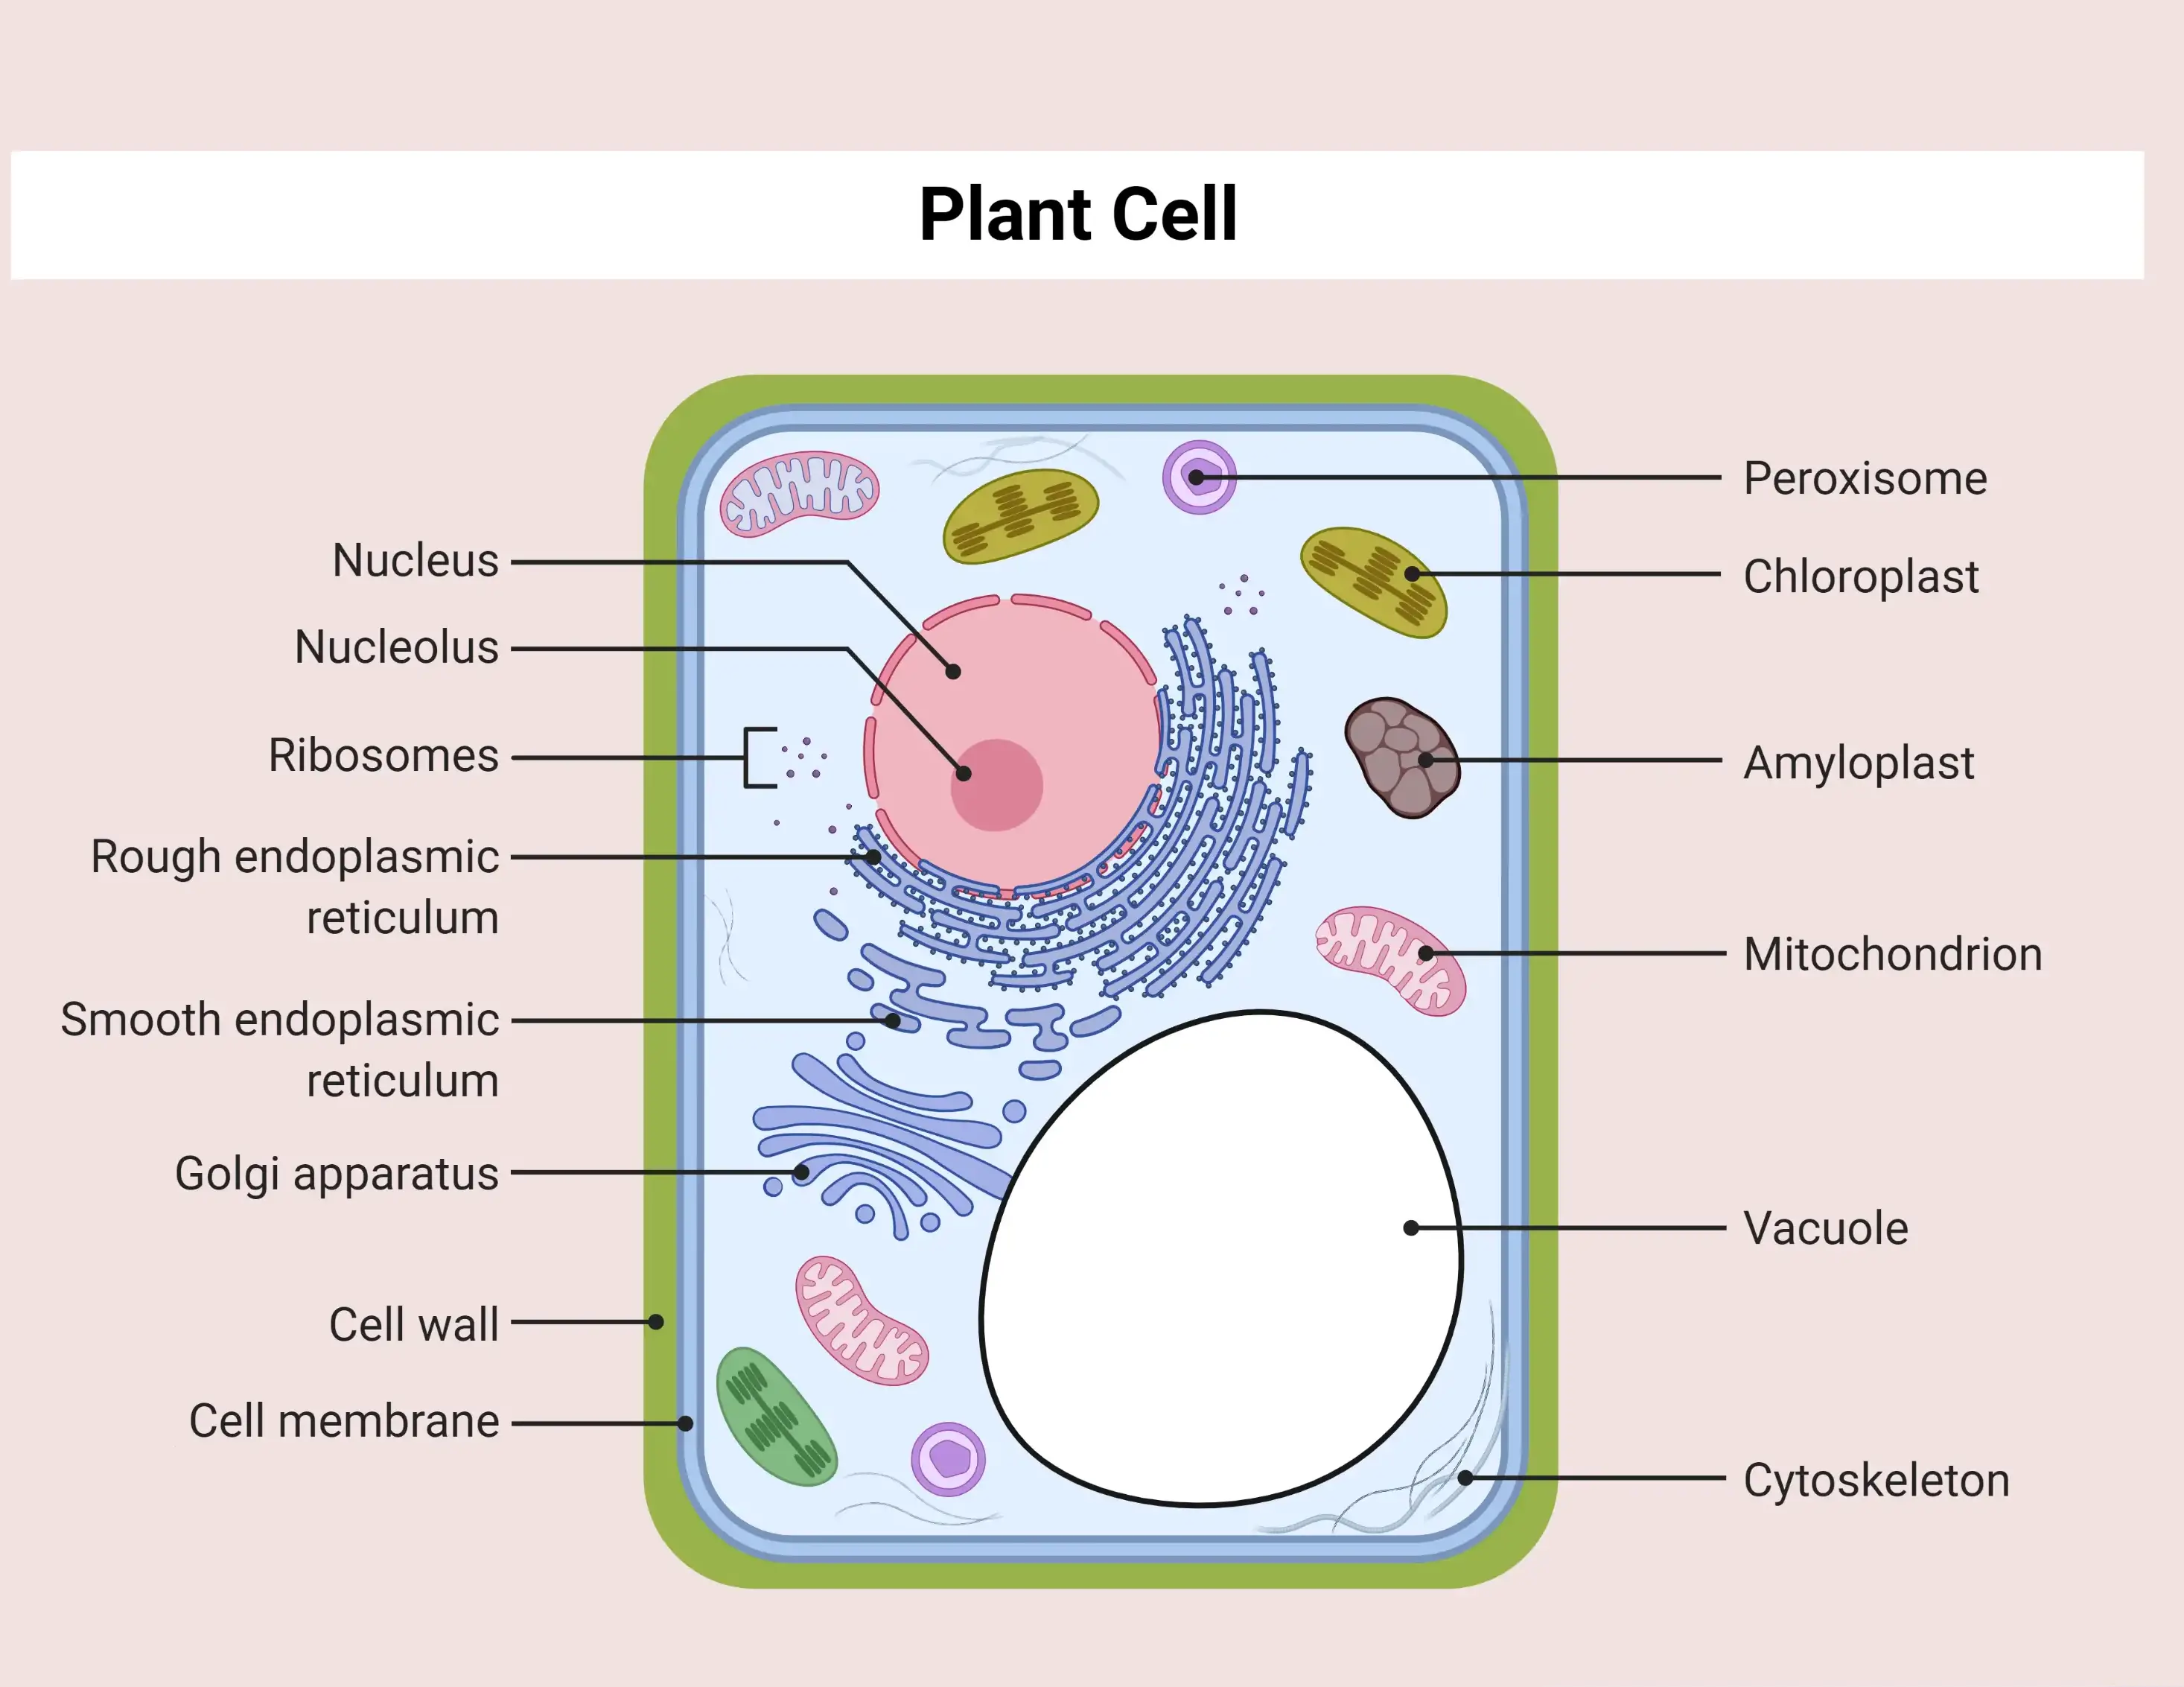 Simple Plant Cell 3-D Model Making Kit®